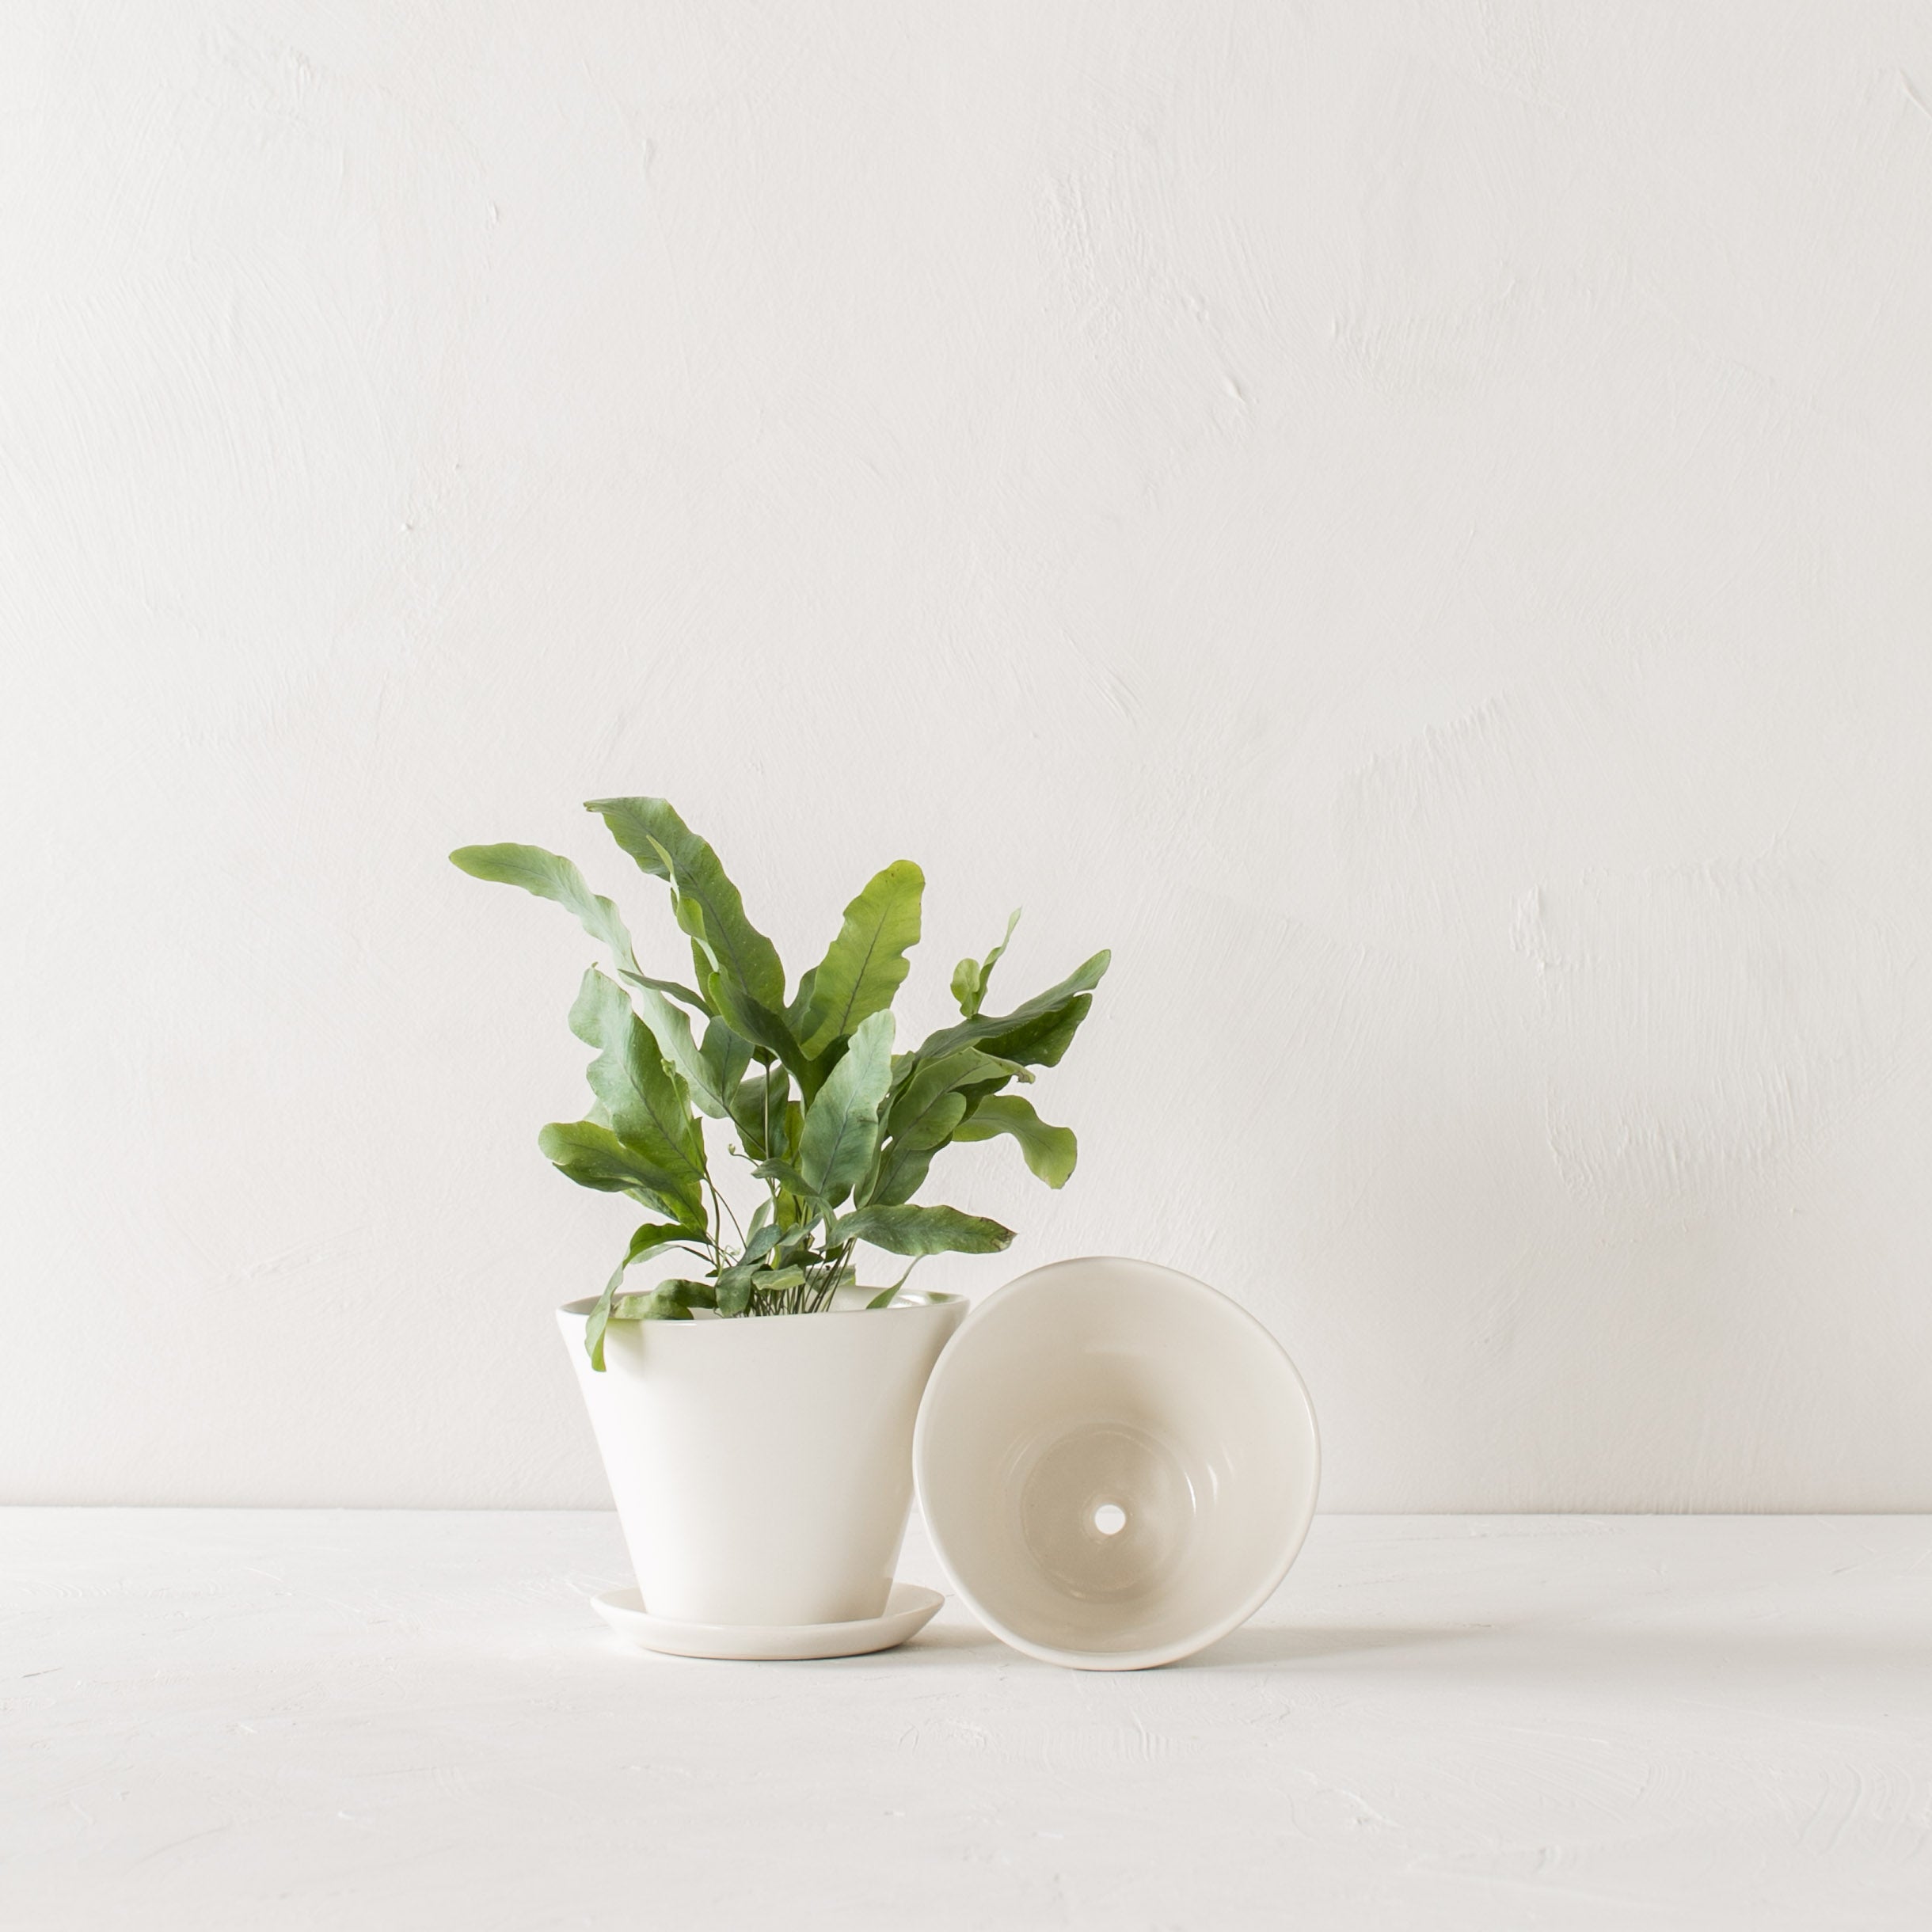 Two minimal white 4 inch tapered planters. One upright with a plant inside as well as a bottom drainage dish. The second laying on its side showing off the bottom drainage hole. Designed and sold by Convivial Production, Kansas City Ceramics.